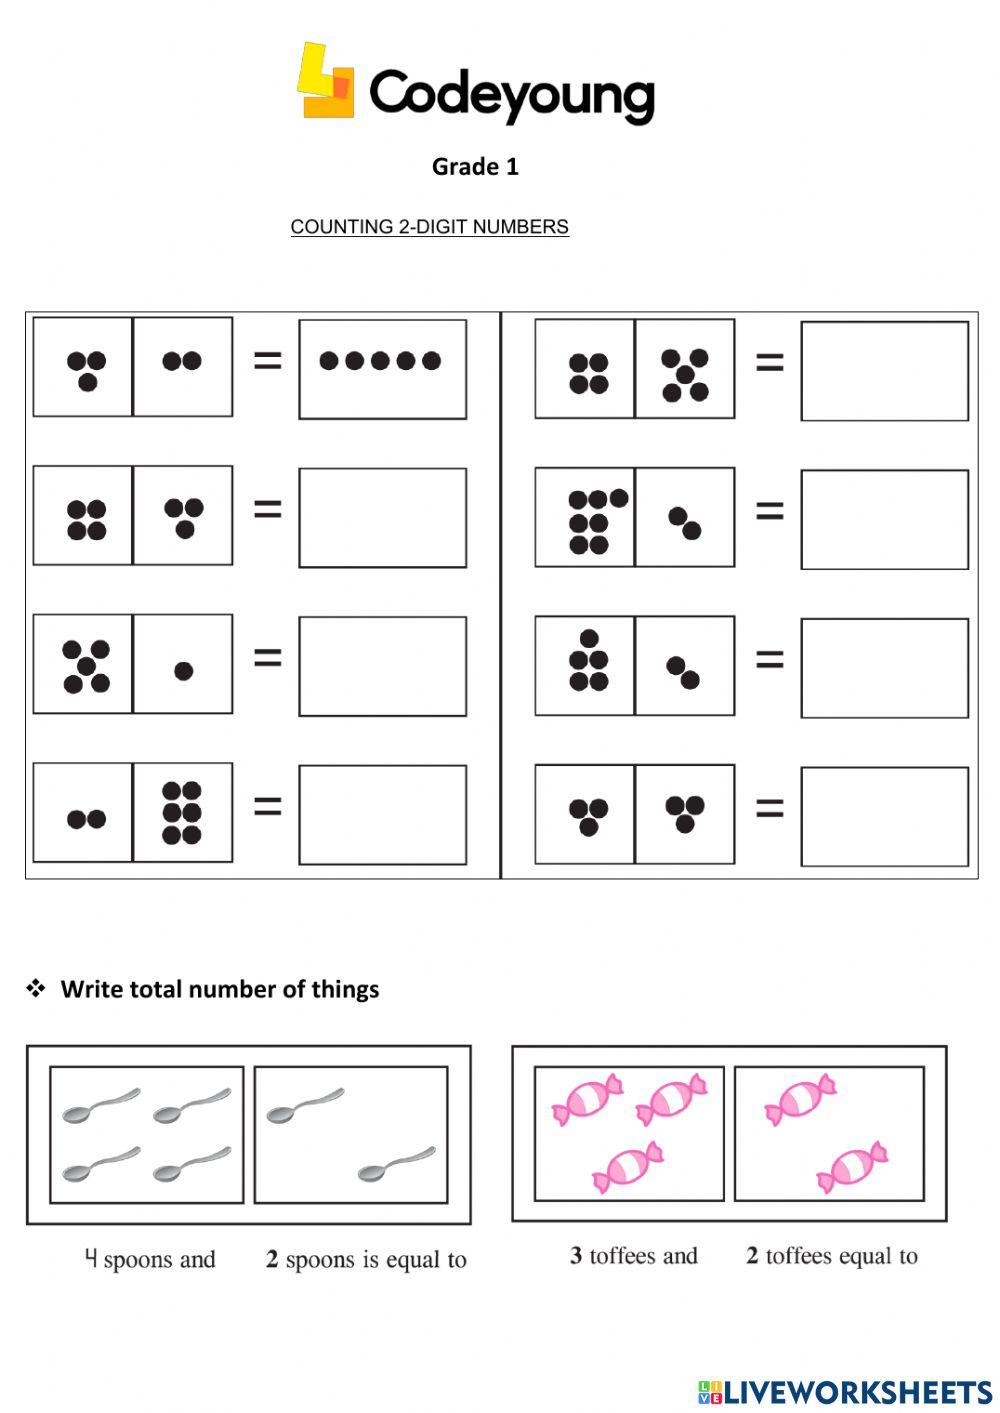 Counting 2-Digit Numbers-CW